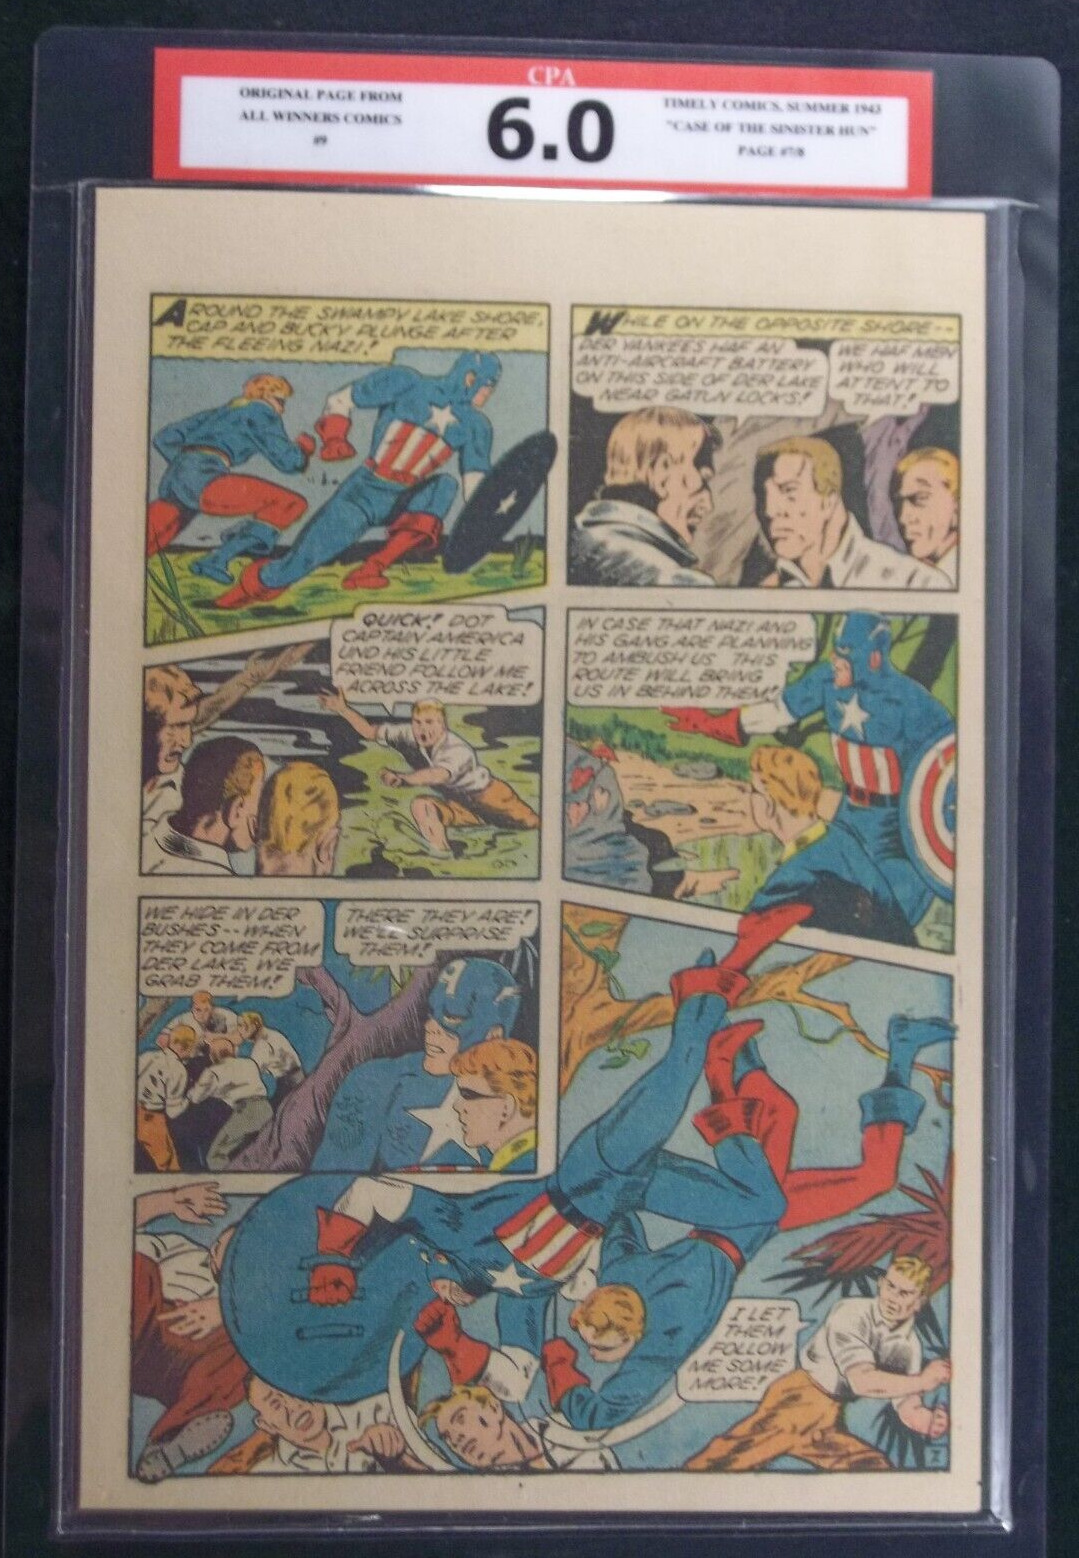 All Winners Comics #9 CPA 6.0 SINGLE PAGE #7/8 Captain America Timely Comics